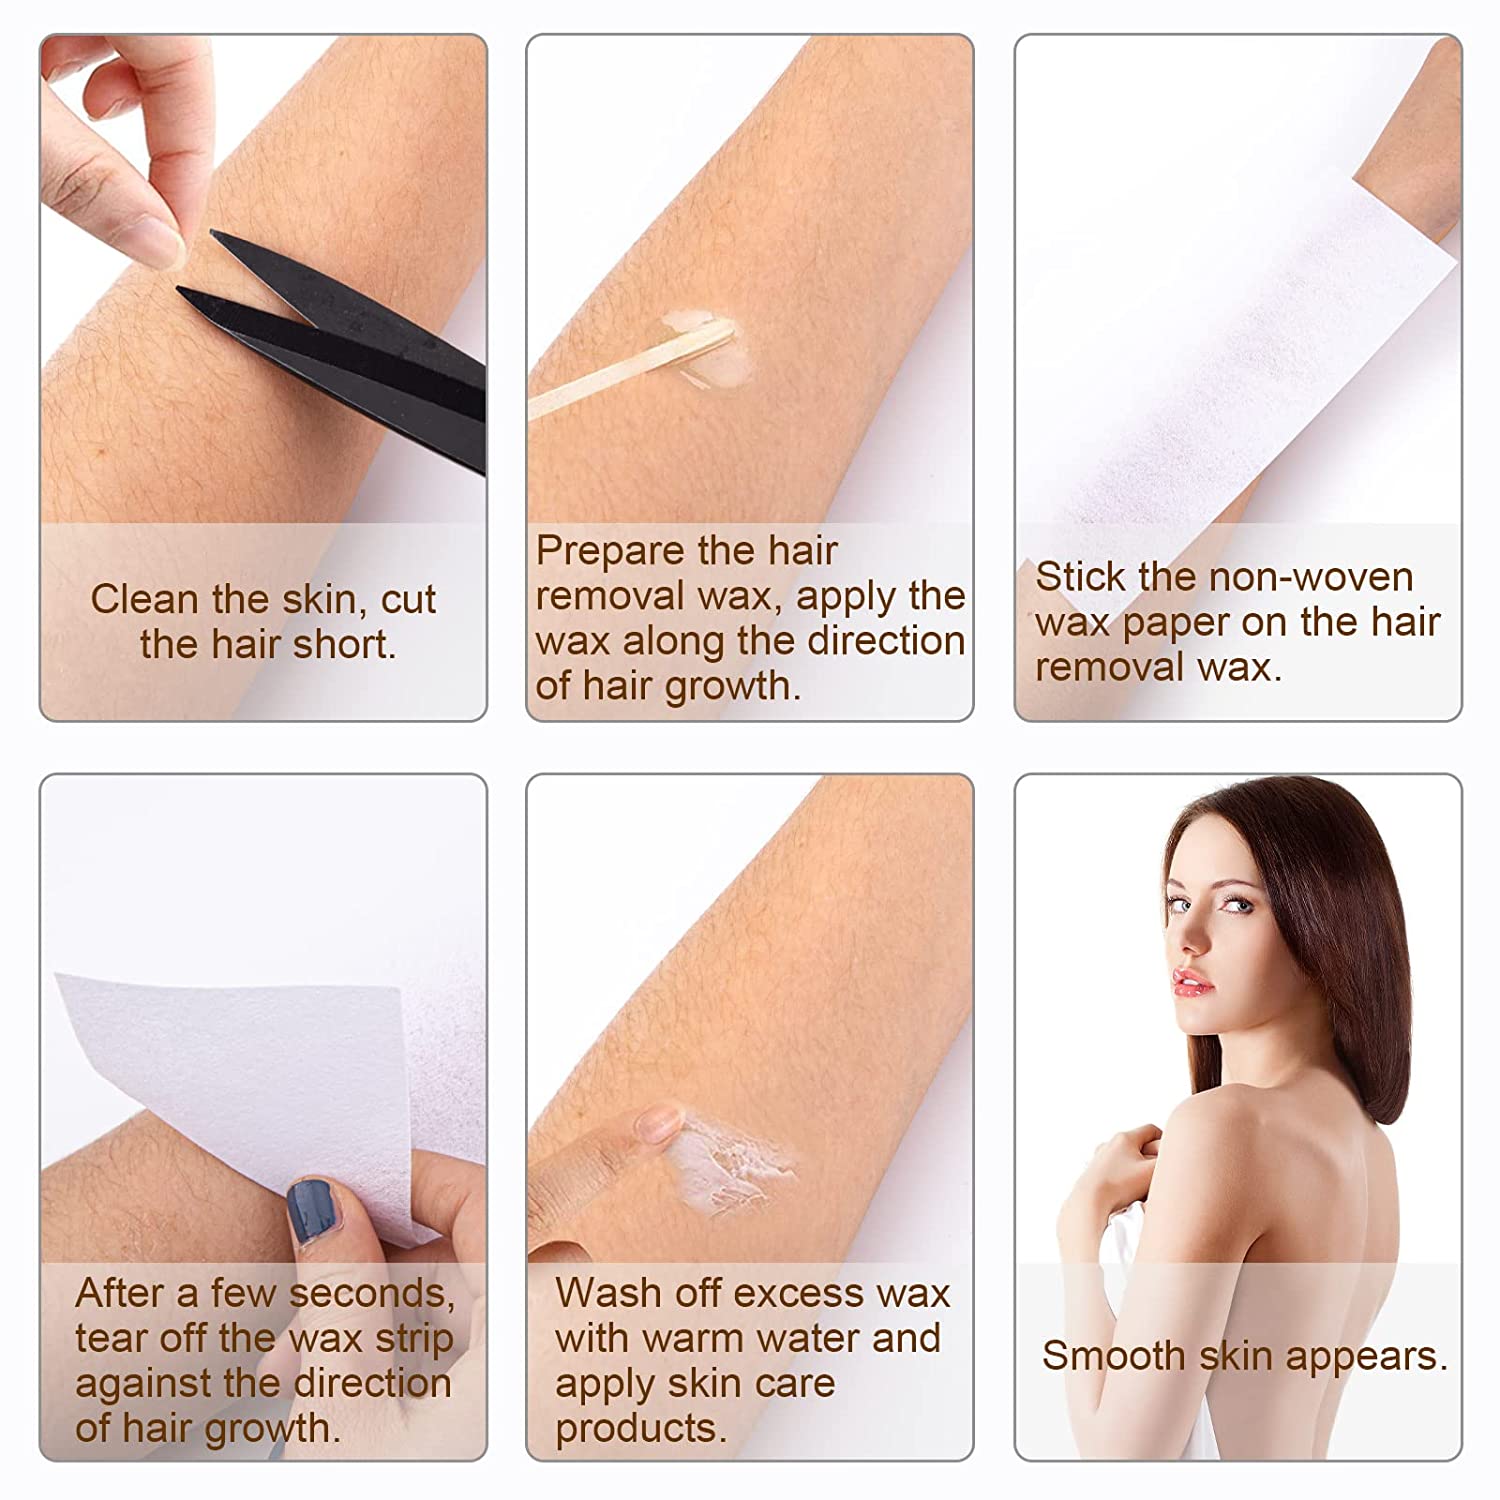 https://www.gabrow.com/wp-content/uploads/2022/04/100-Piece-Non-woven-Waxing-Strips-Hair-Removal-Wax-Paper7.jpg